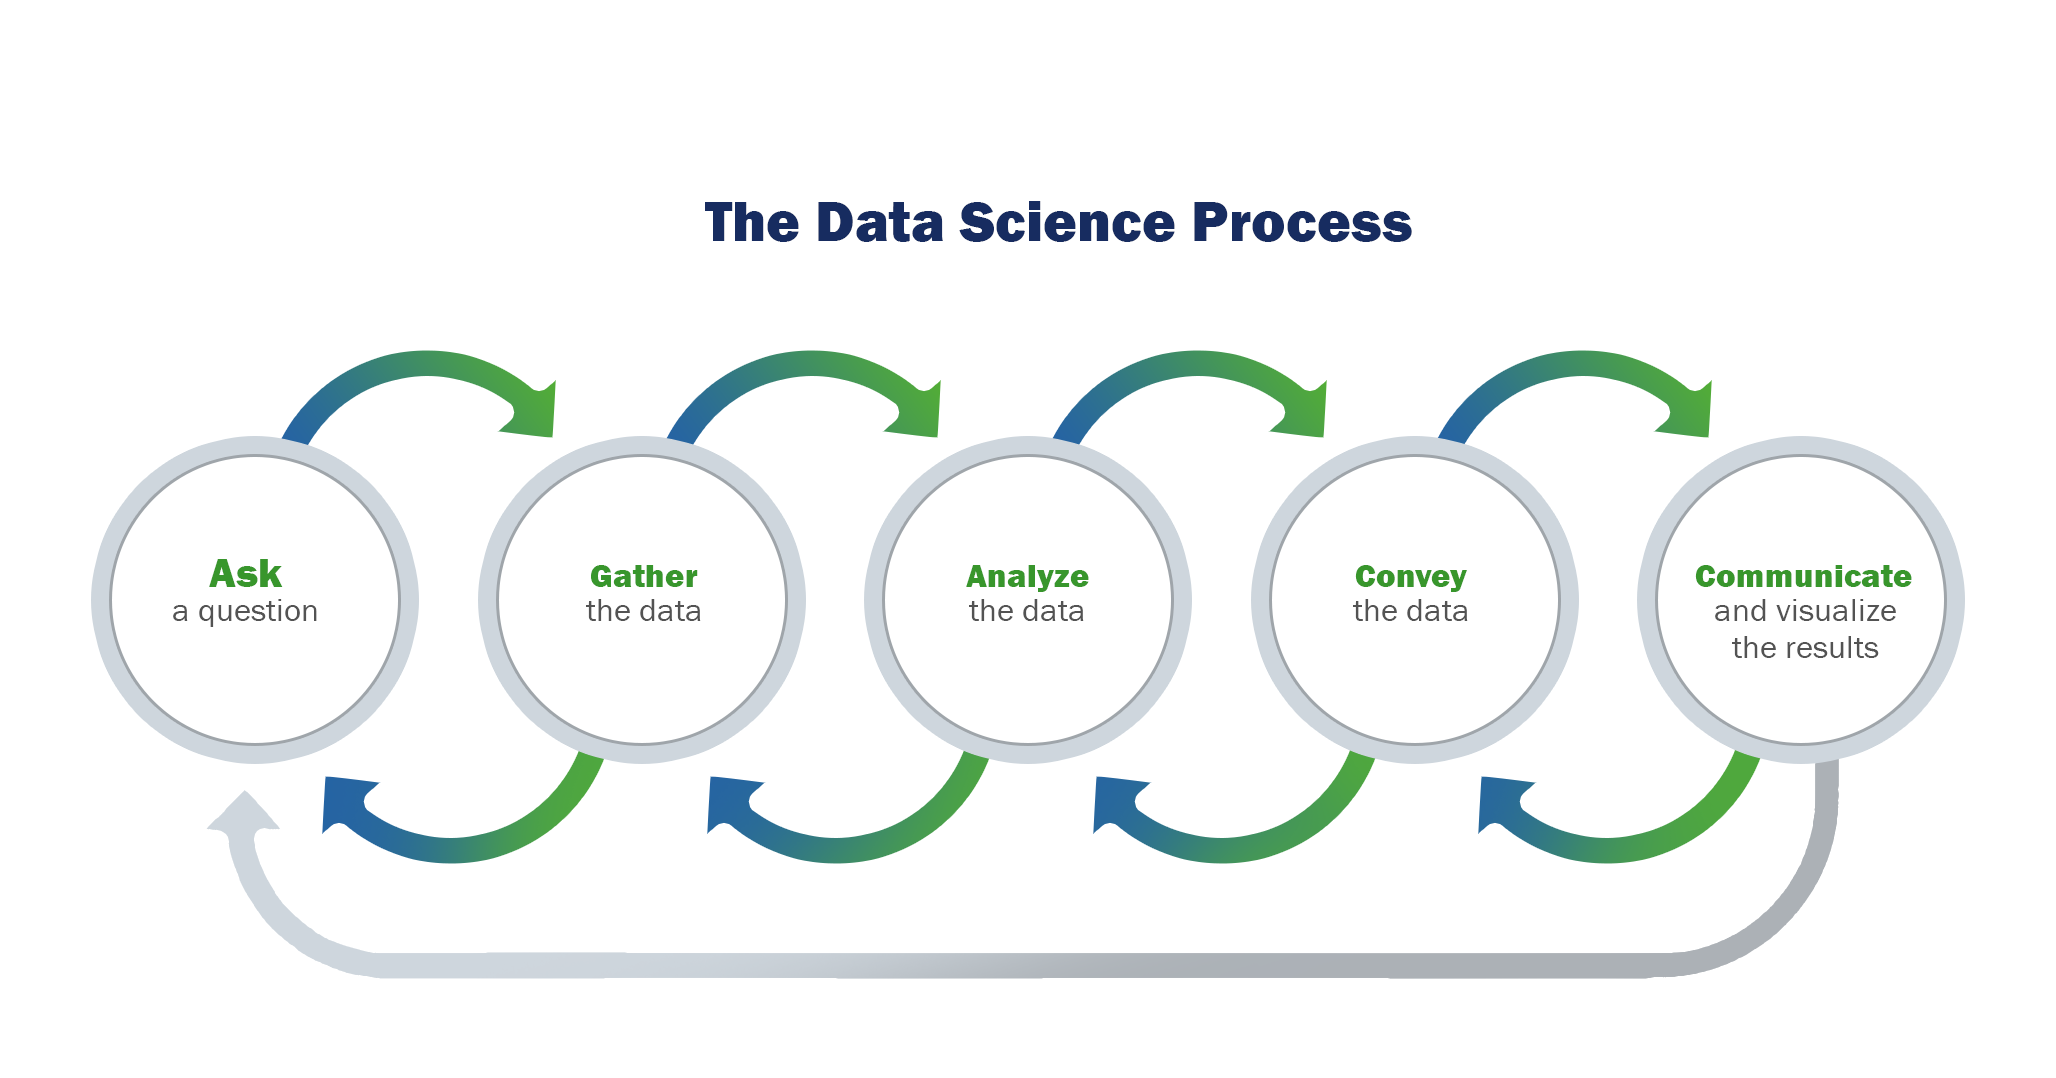 The Data Science Process. Image of 5 circles, each flowing back and forth via arrows above and below them. Circle 1. Ask a question. 2. Gather the data. 3. Analyze the data. 4. Convey the data. Communicate and visualize the results. 